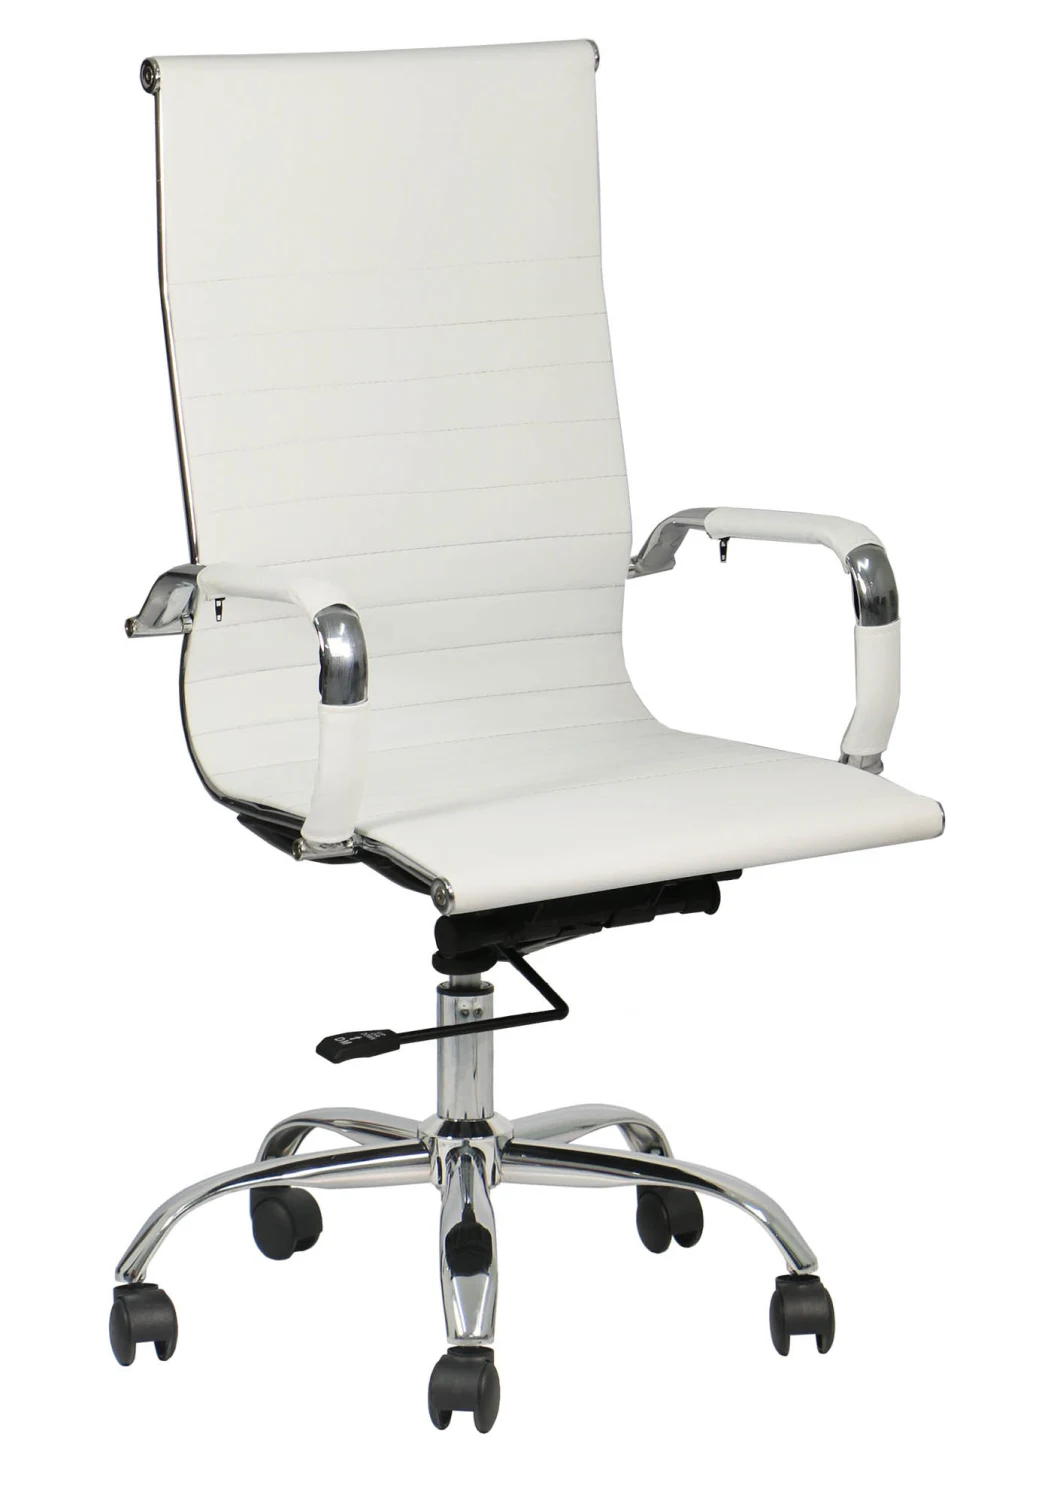 Ribbed Chairs Ergonomic Executive Conference Task Chair with Arms